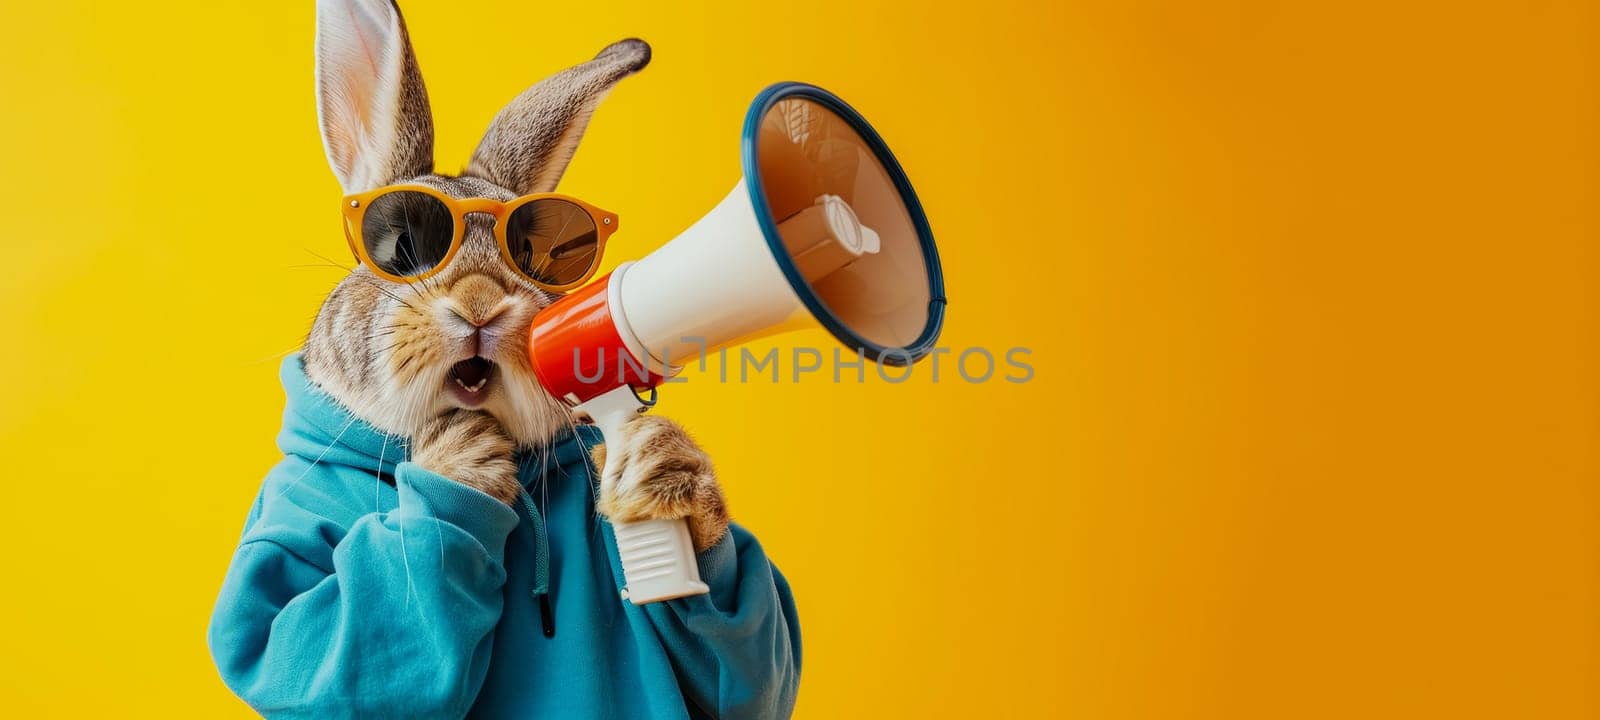 Fashionable Rabbit Announcing with Megaphone by andreyz